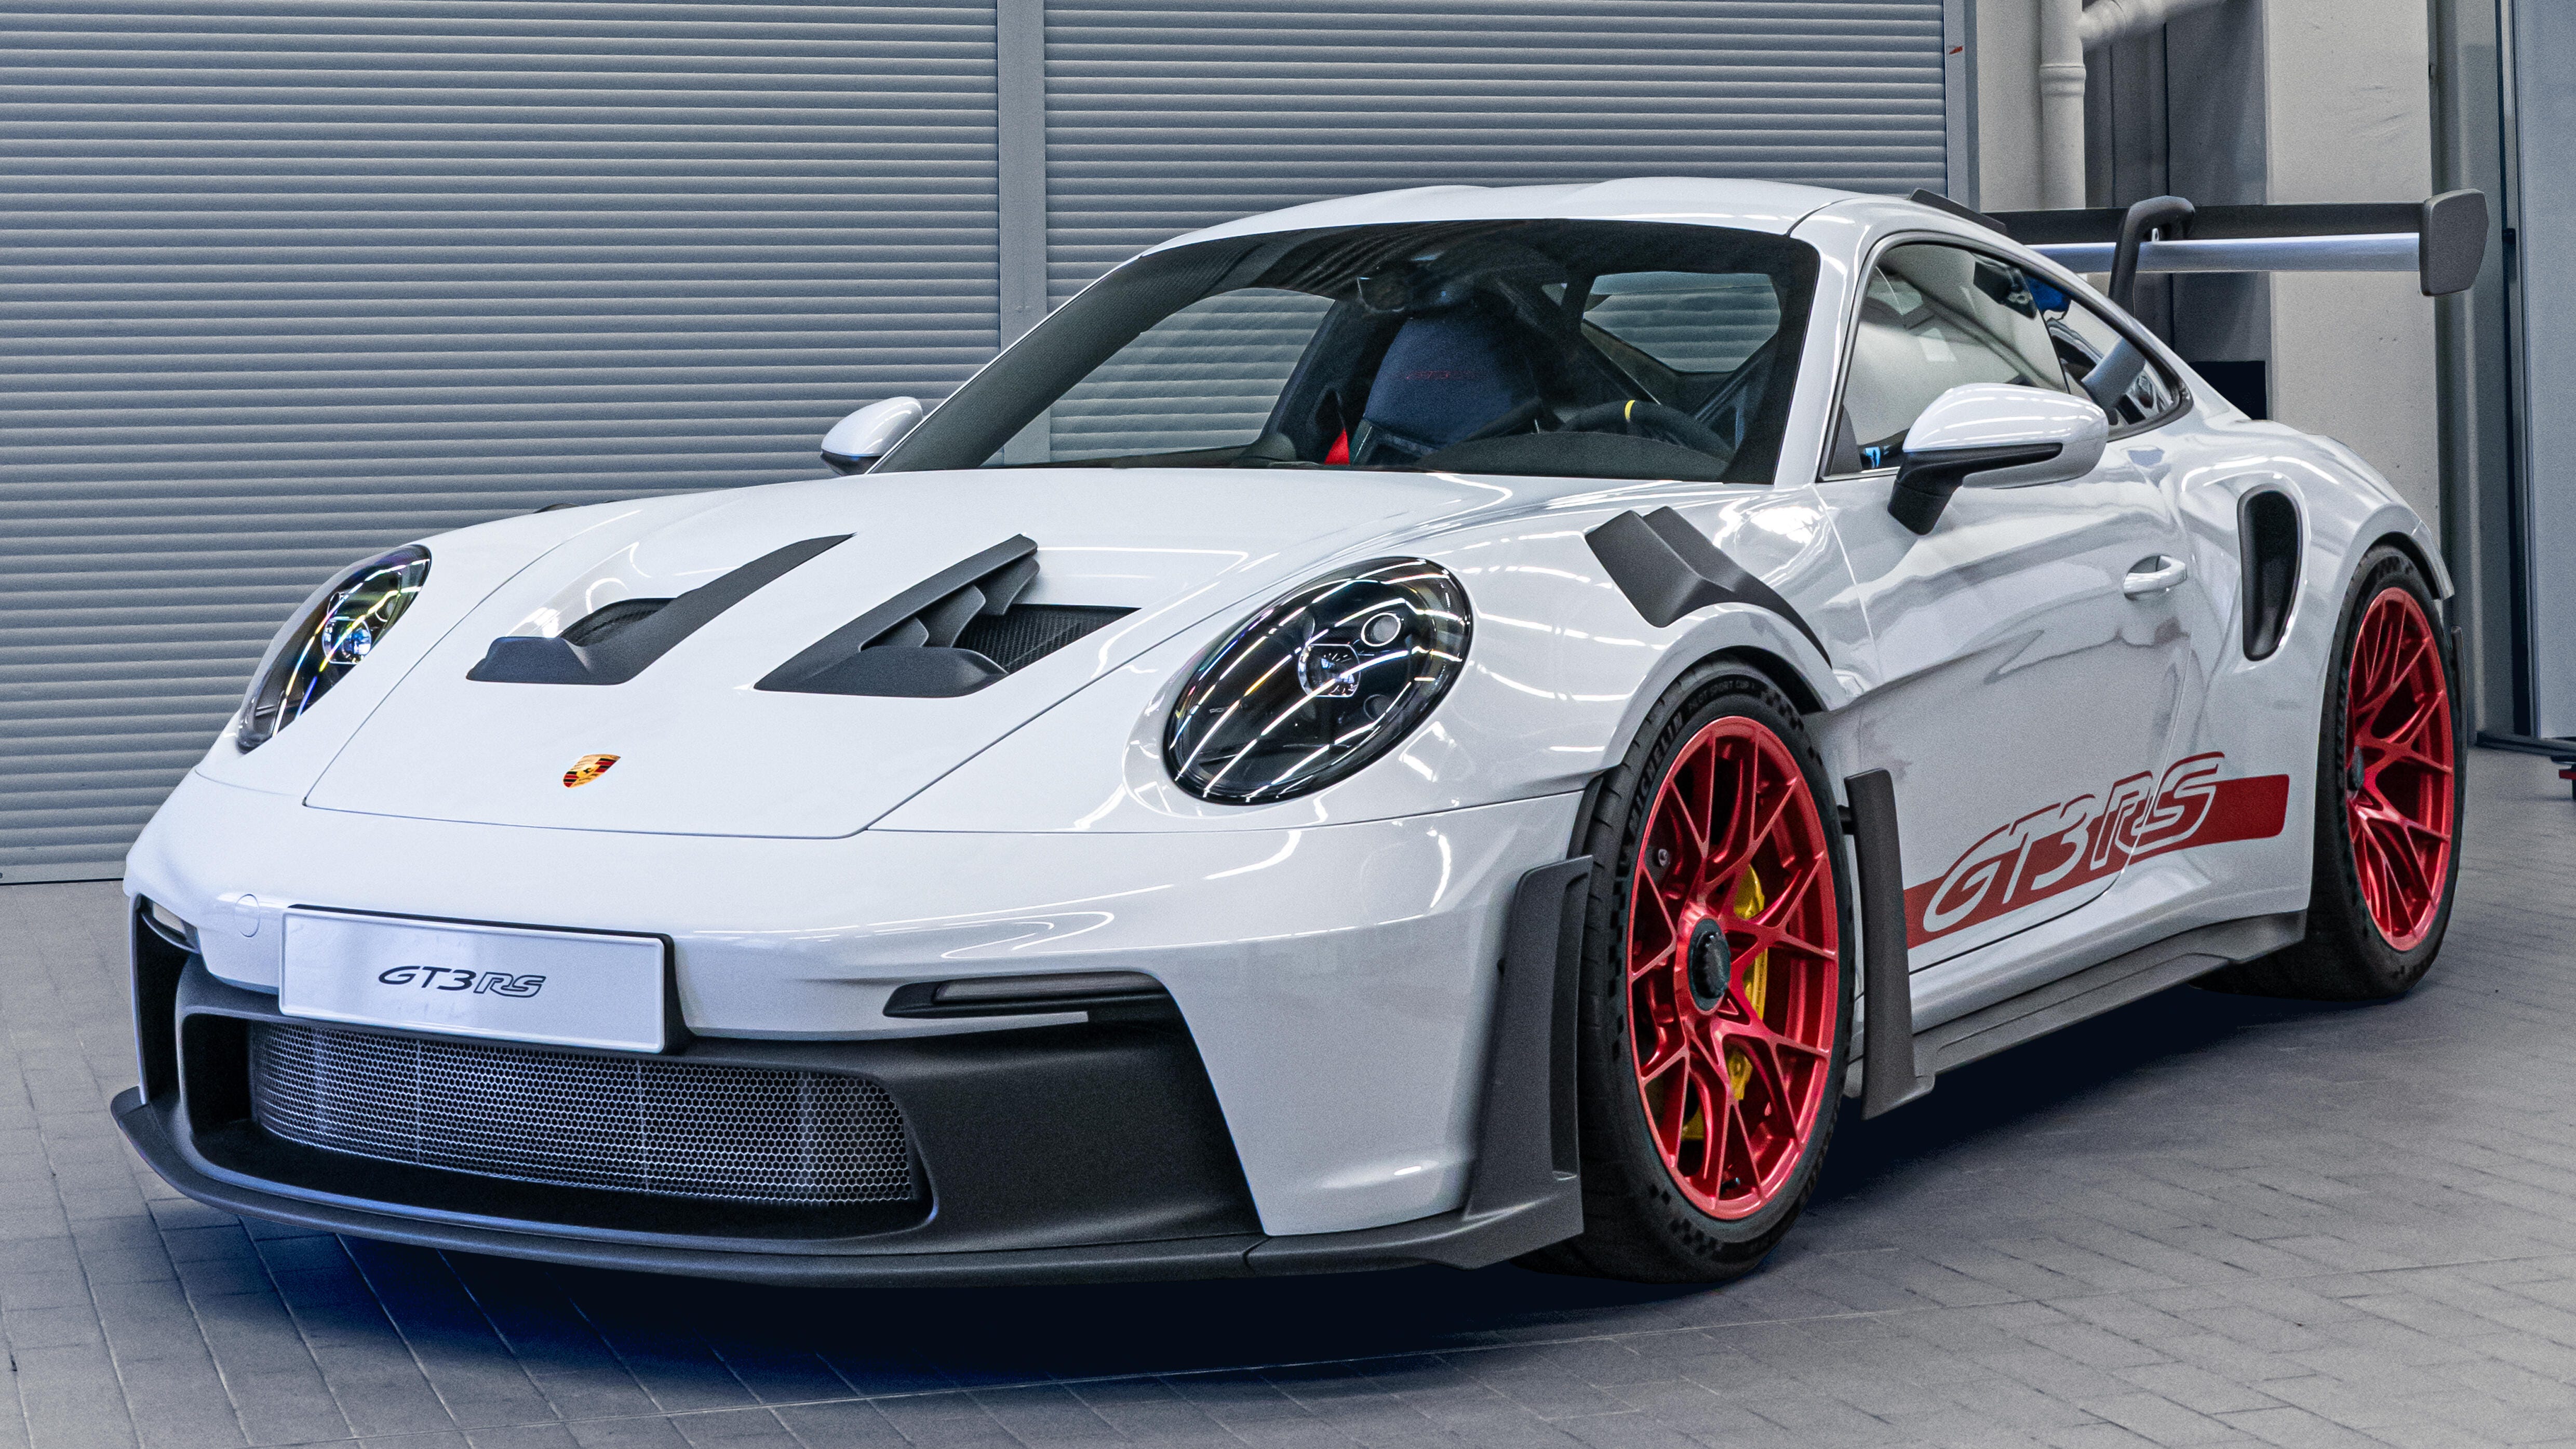 Porsche Pushes the 911 to New Extremes With the New GT3 RS - Video - CNET